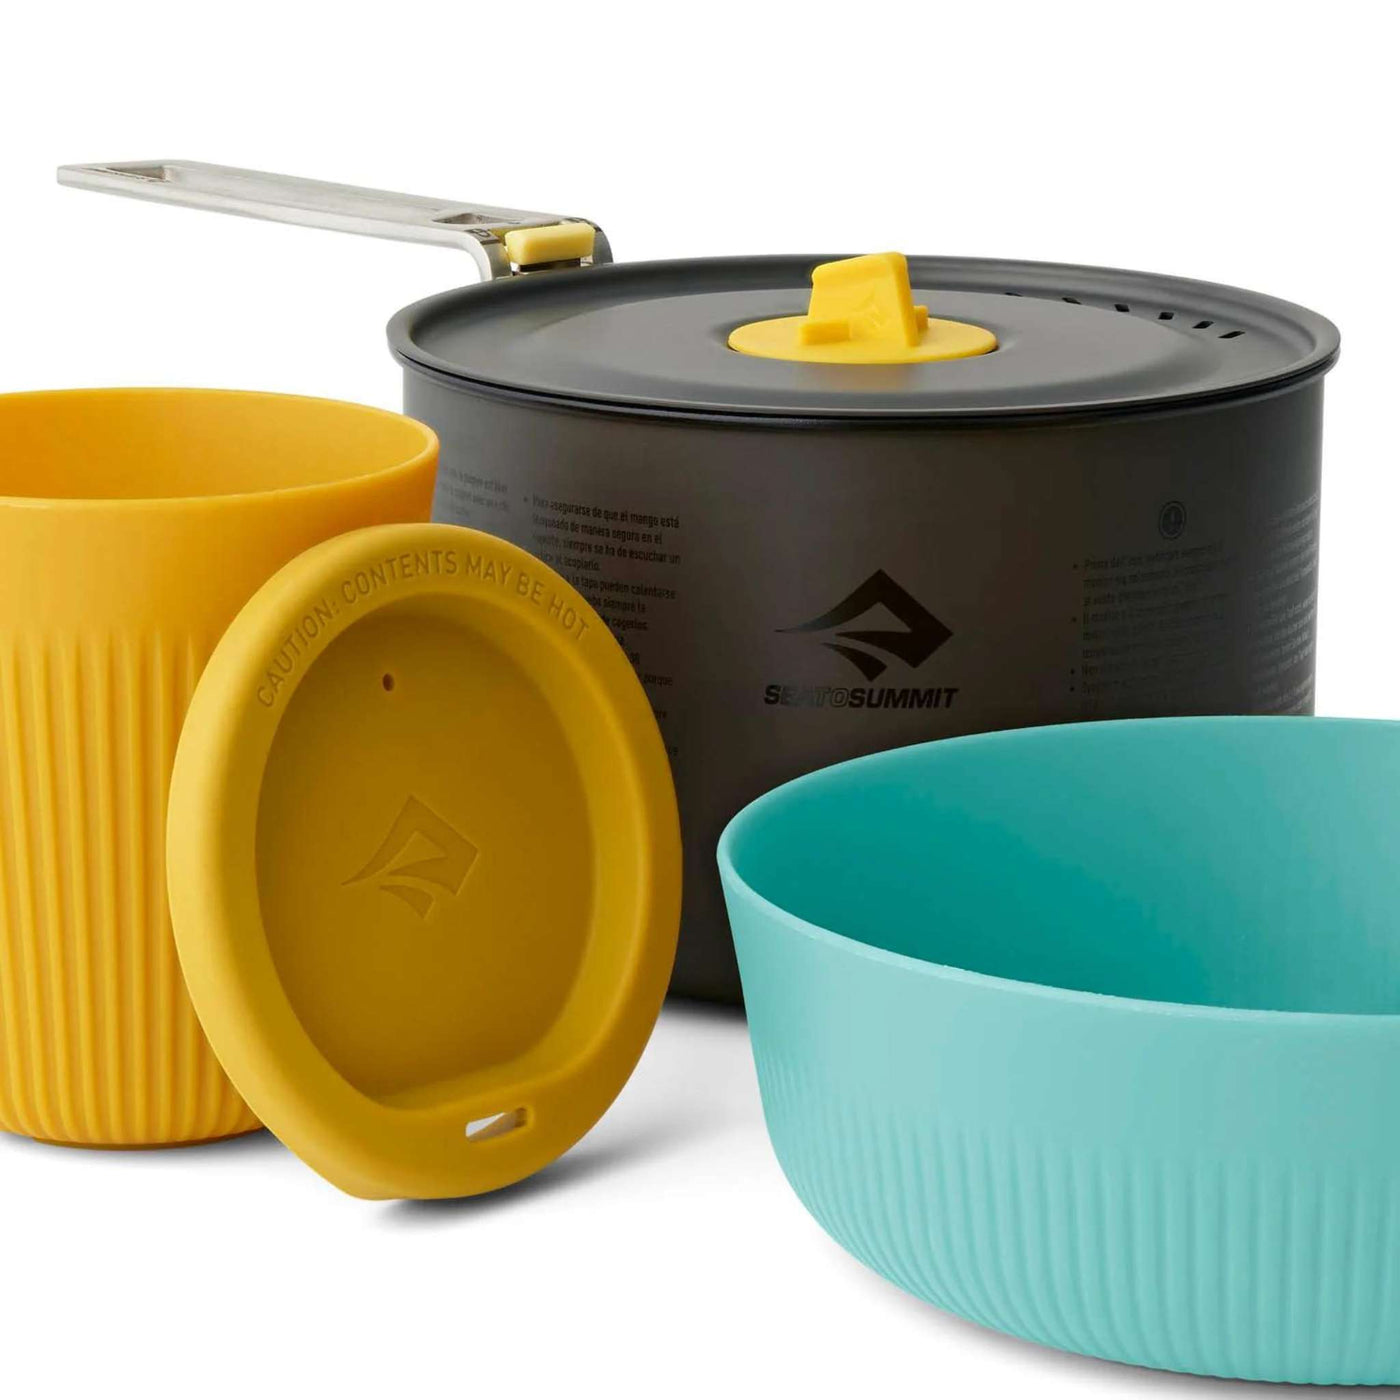 Sea to Summit Frontier One Pot Cook Set - 1P - 3 Piece | Camp Kitchen Cook Set | Further Faster Christchurch NZ | #multi